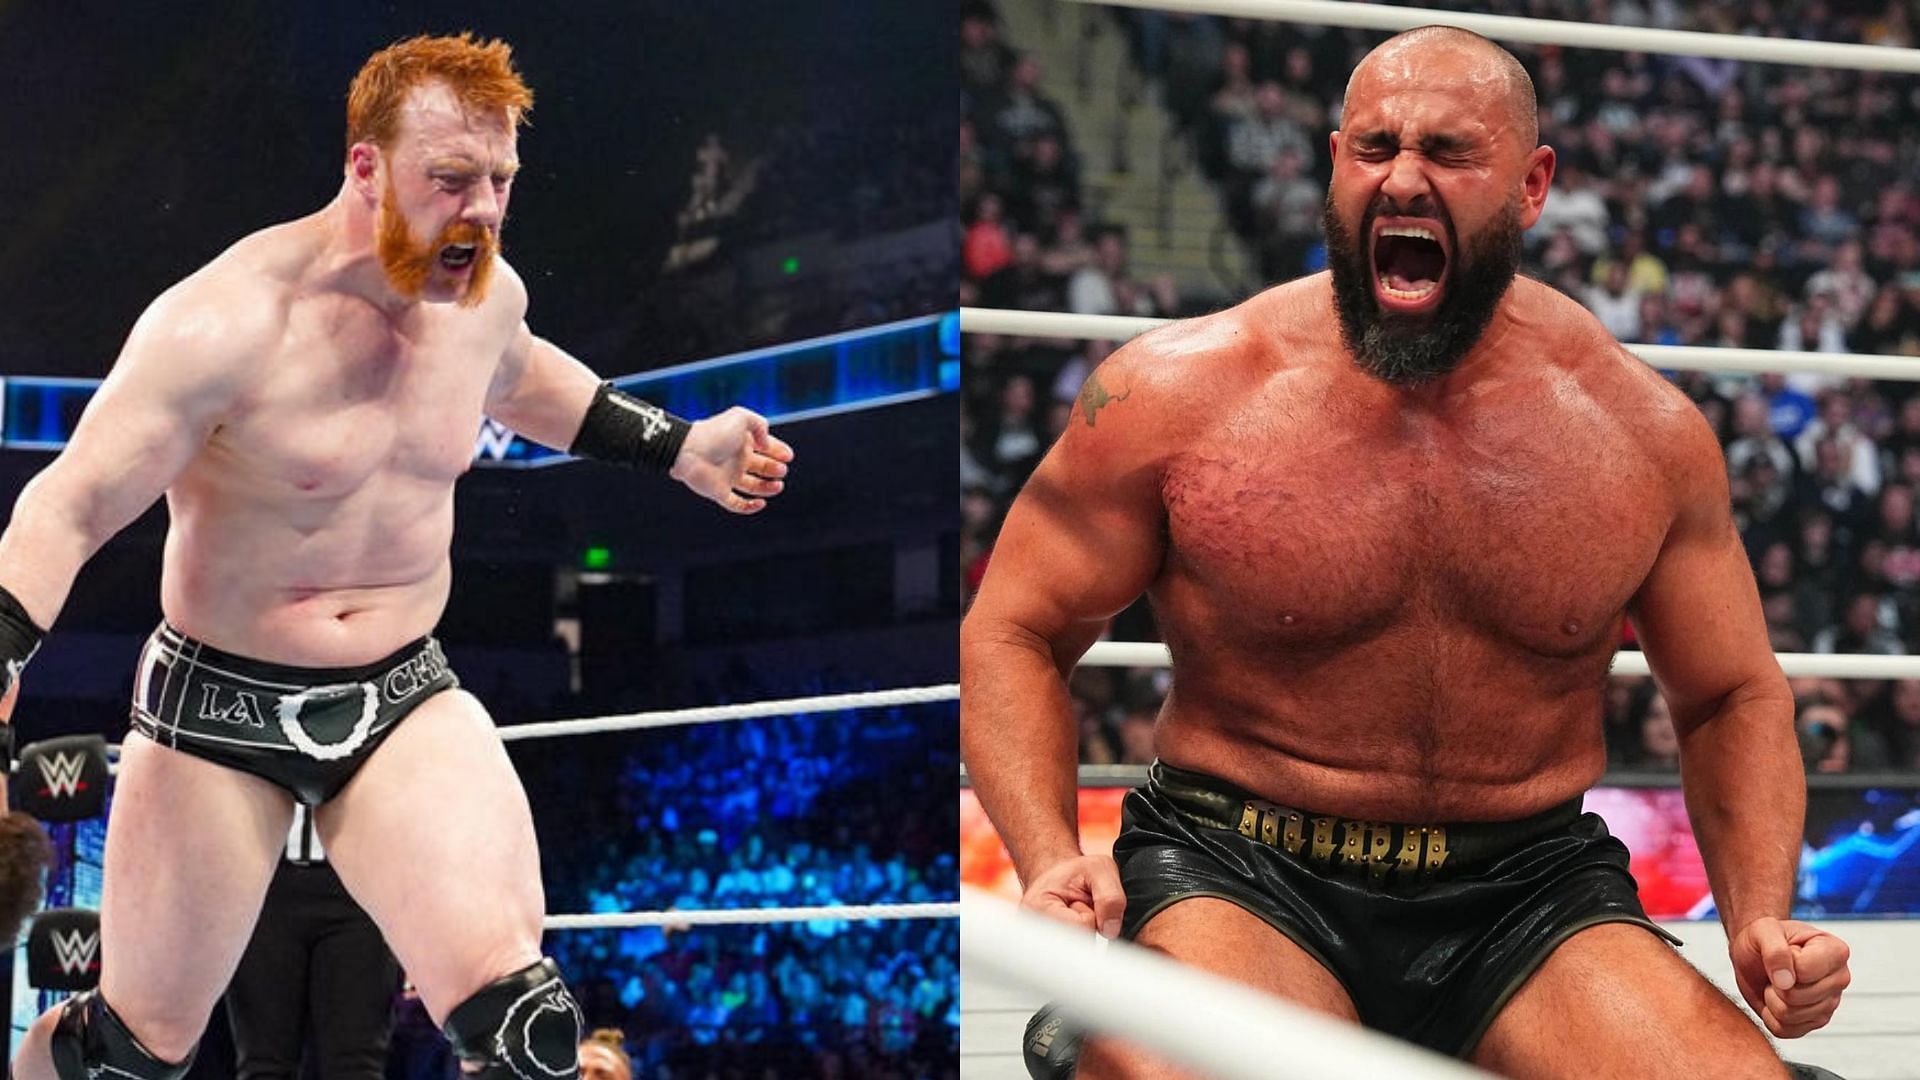 Miro and Sheamus both worked with each other in WWE